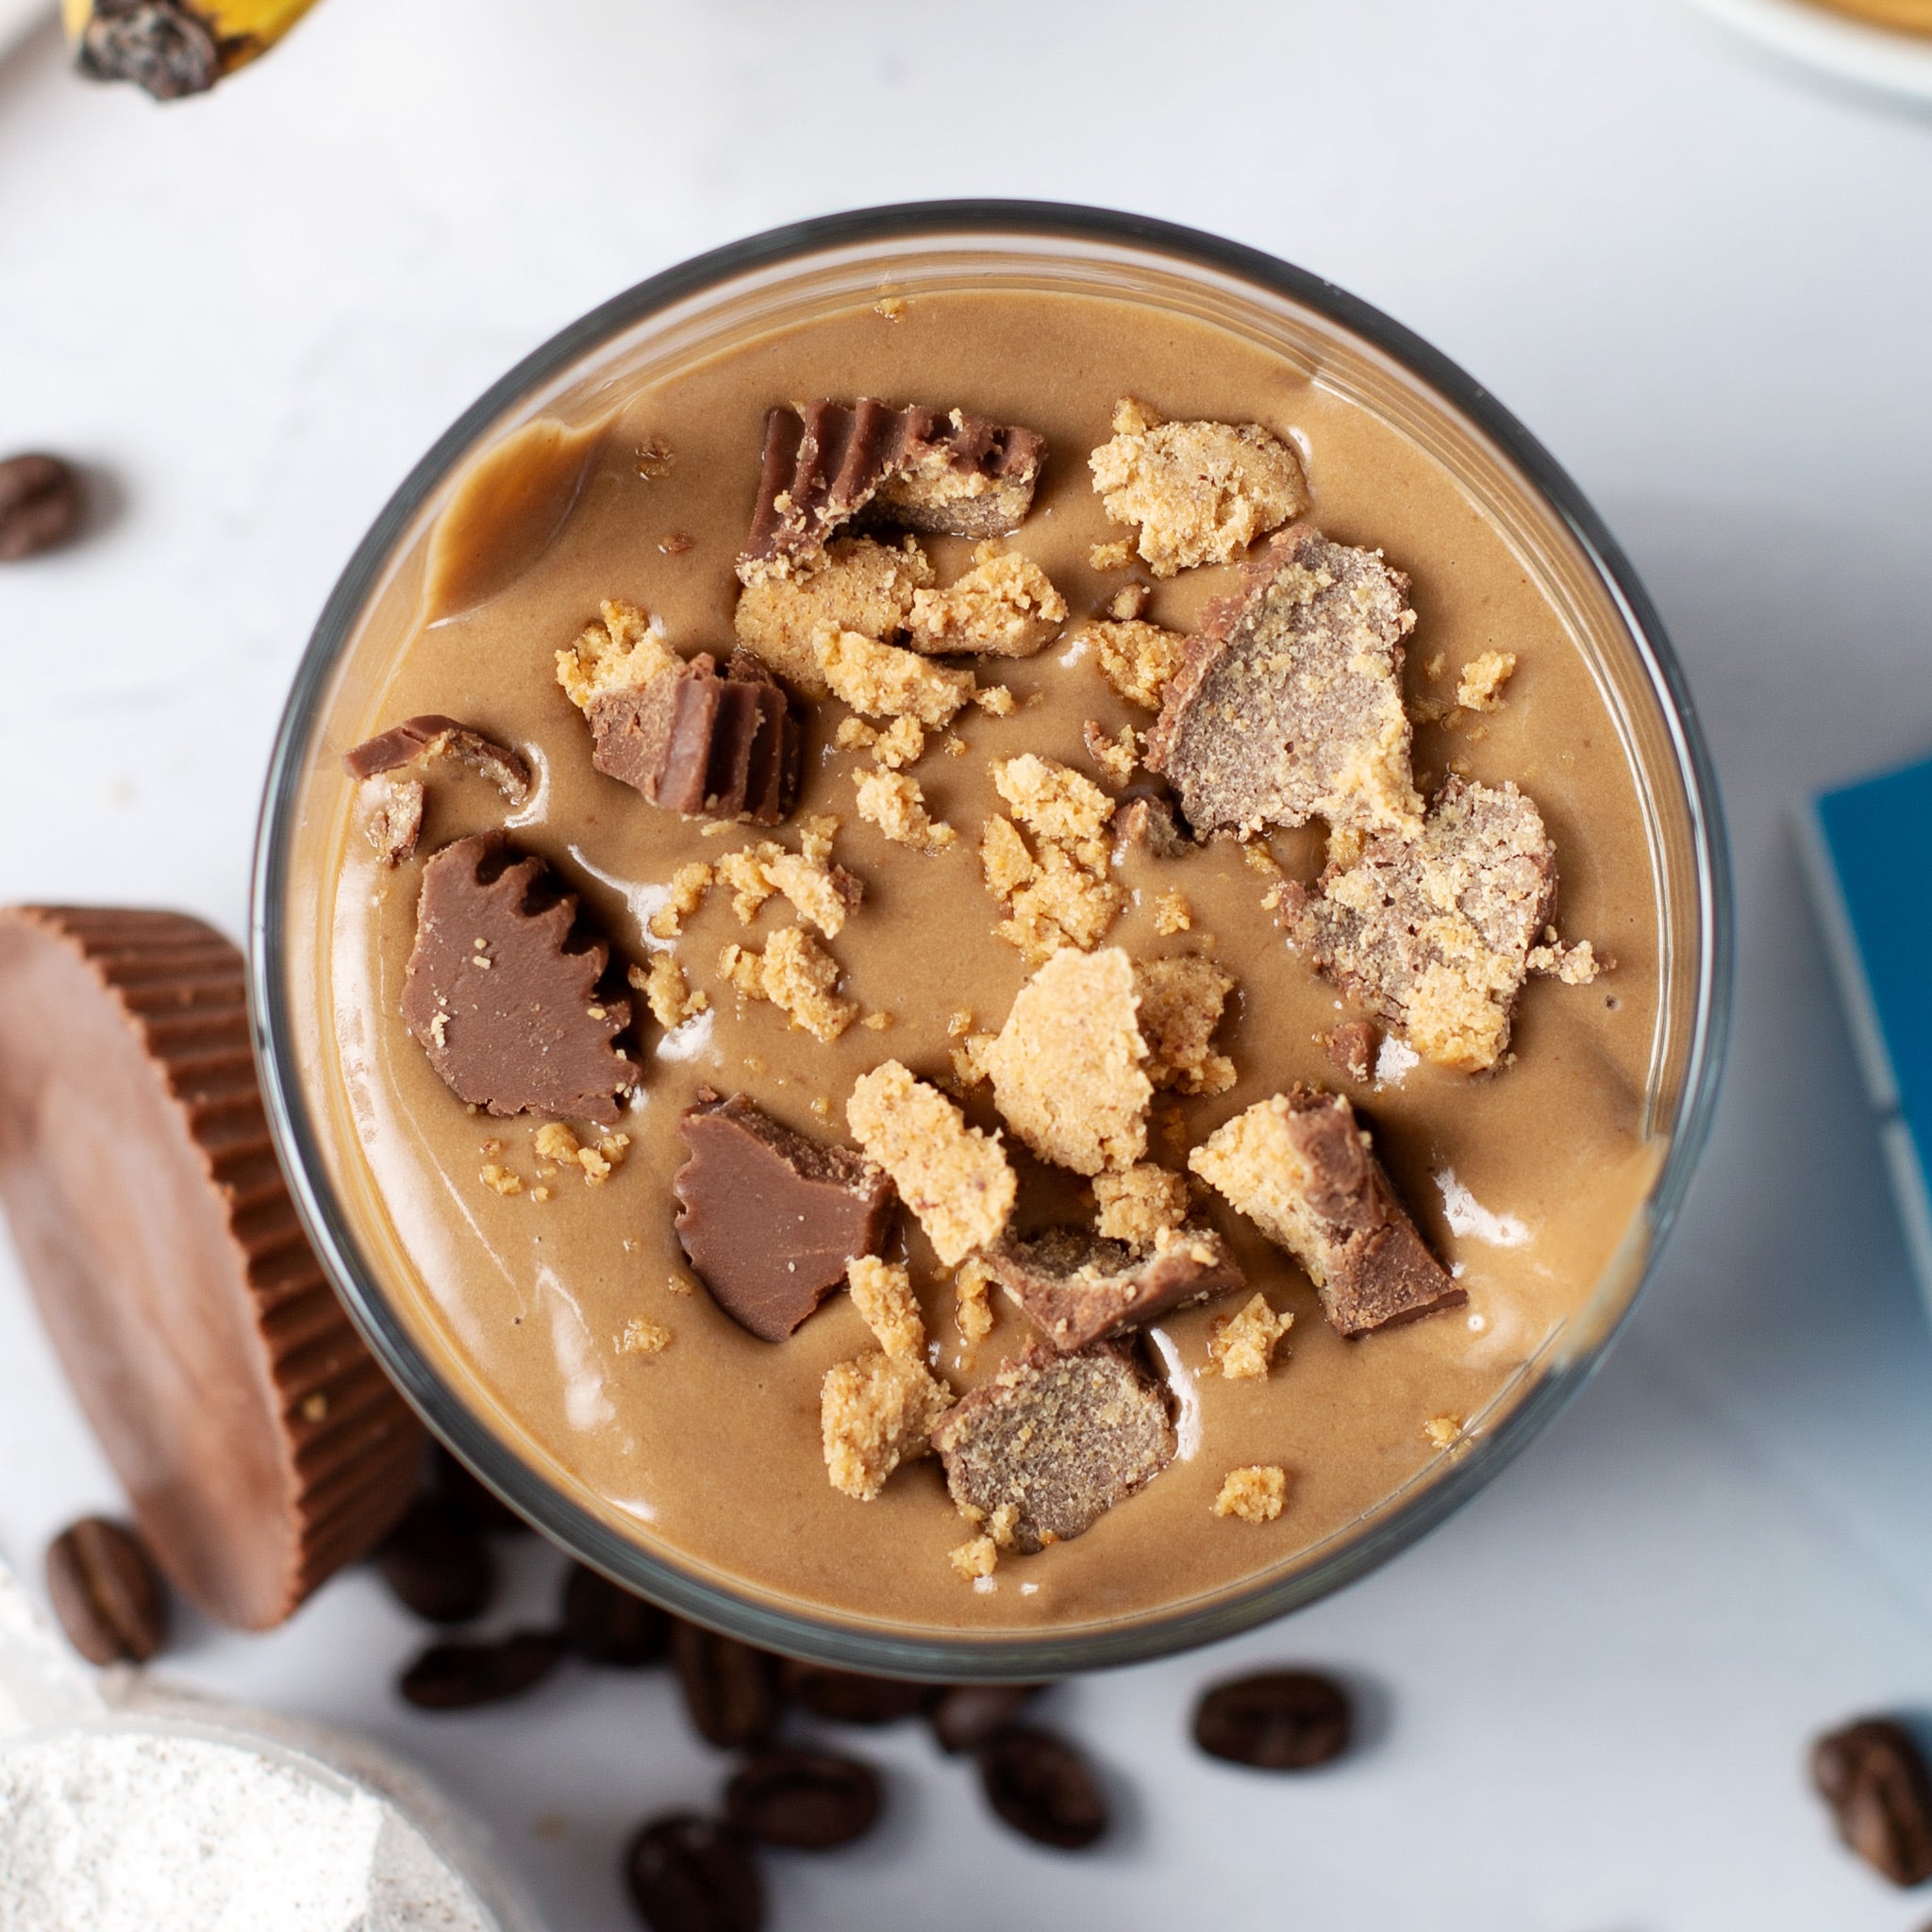 Peanut Butter & Coffee Smoothie